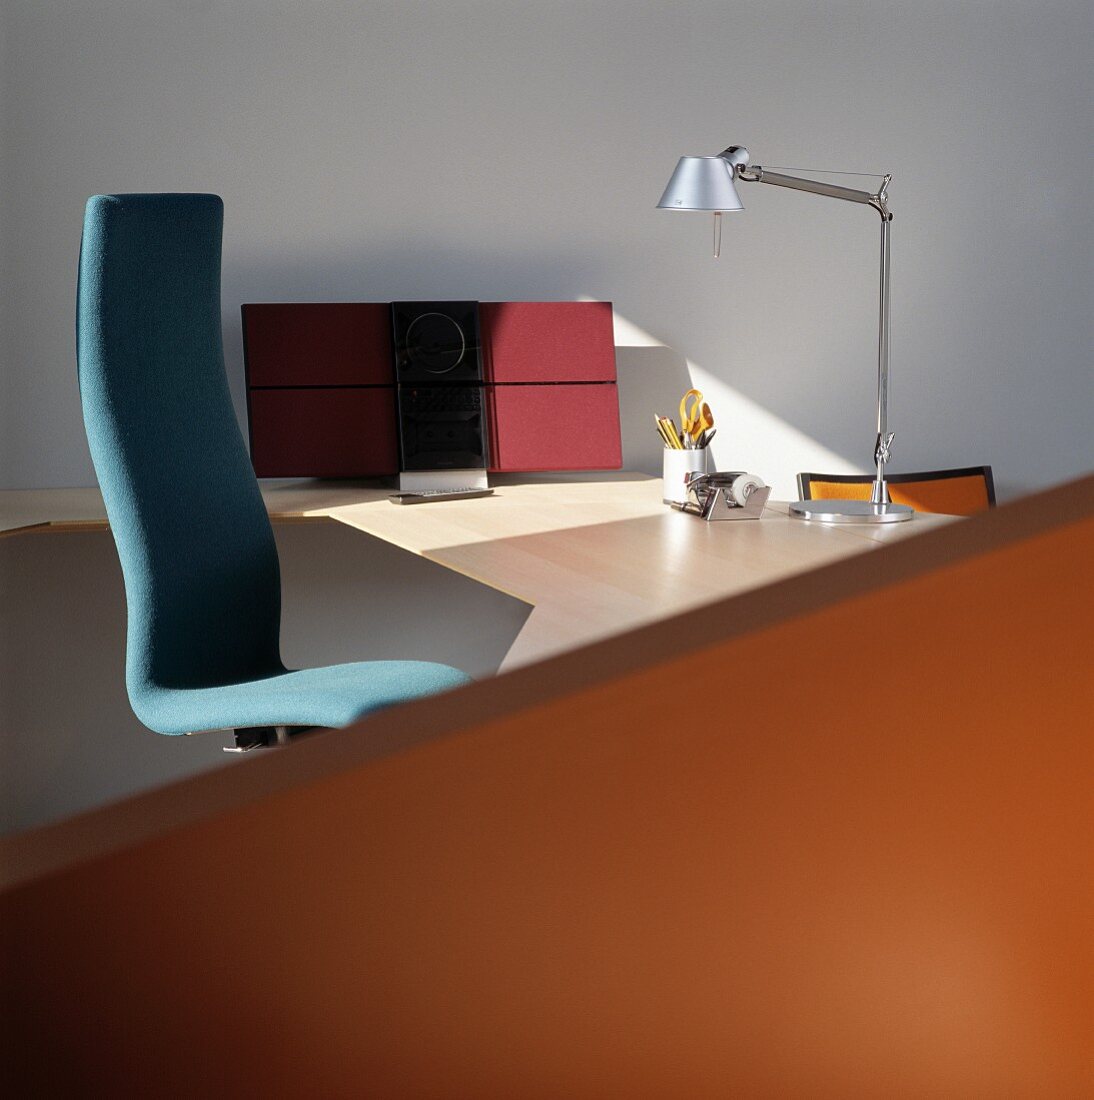 Blue office chair at modern desk with designer table lamp